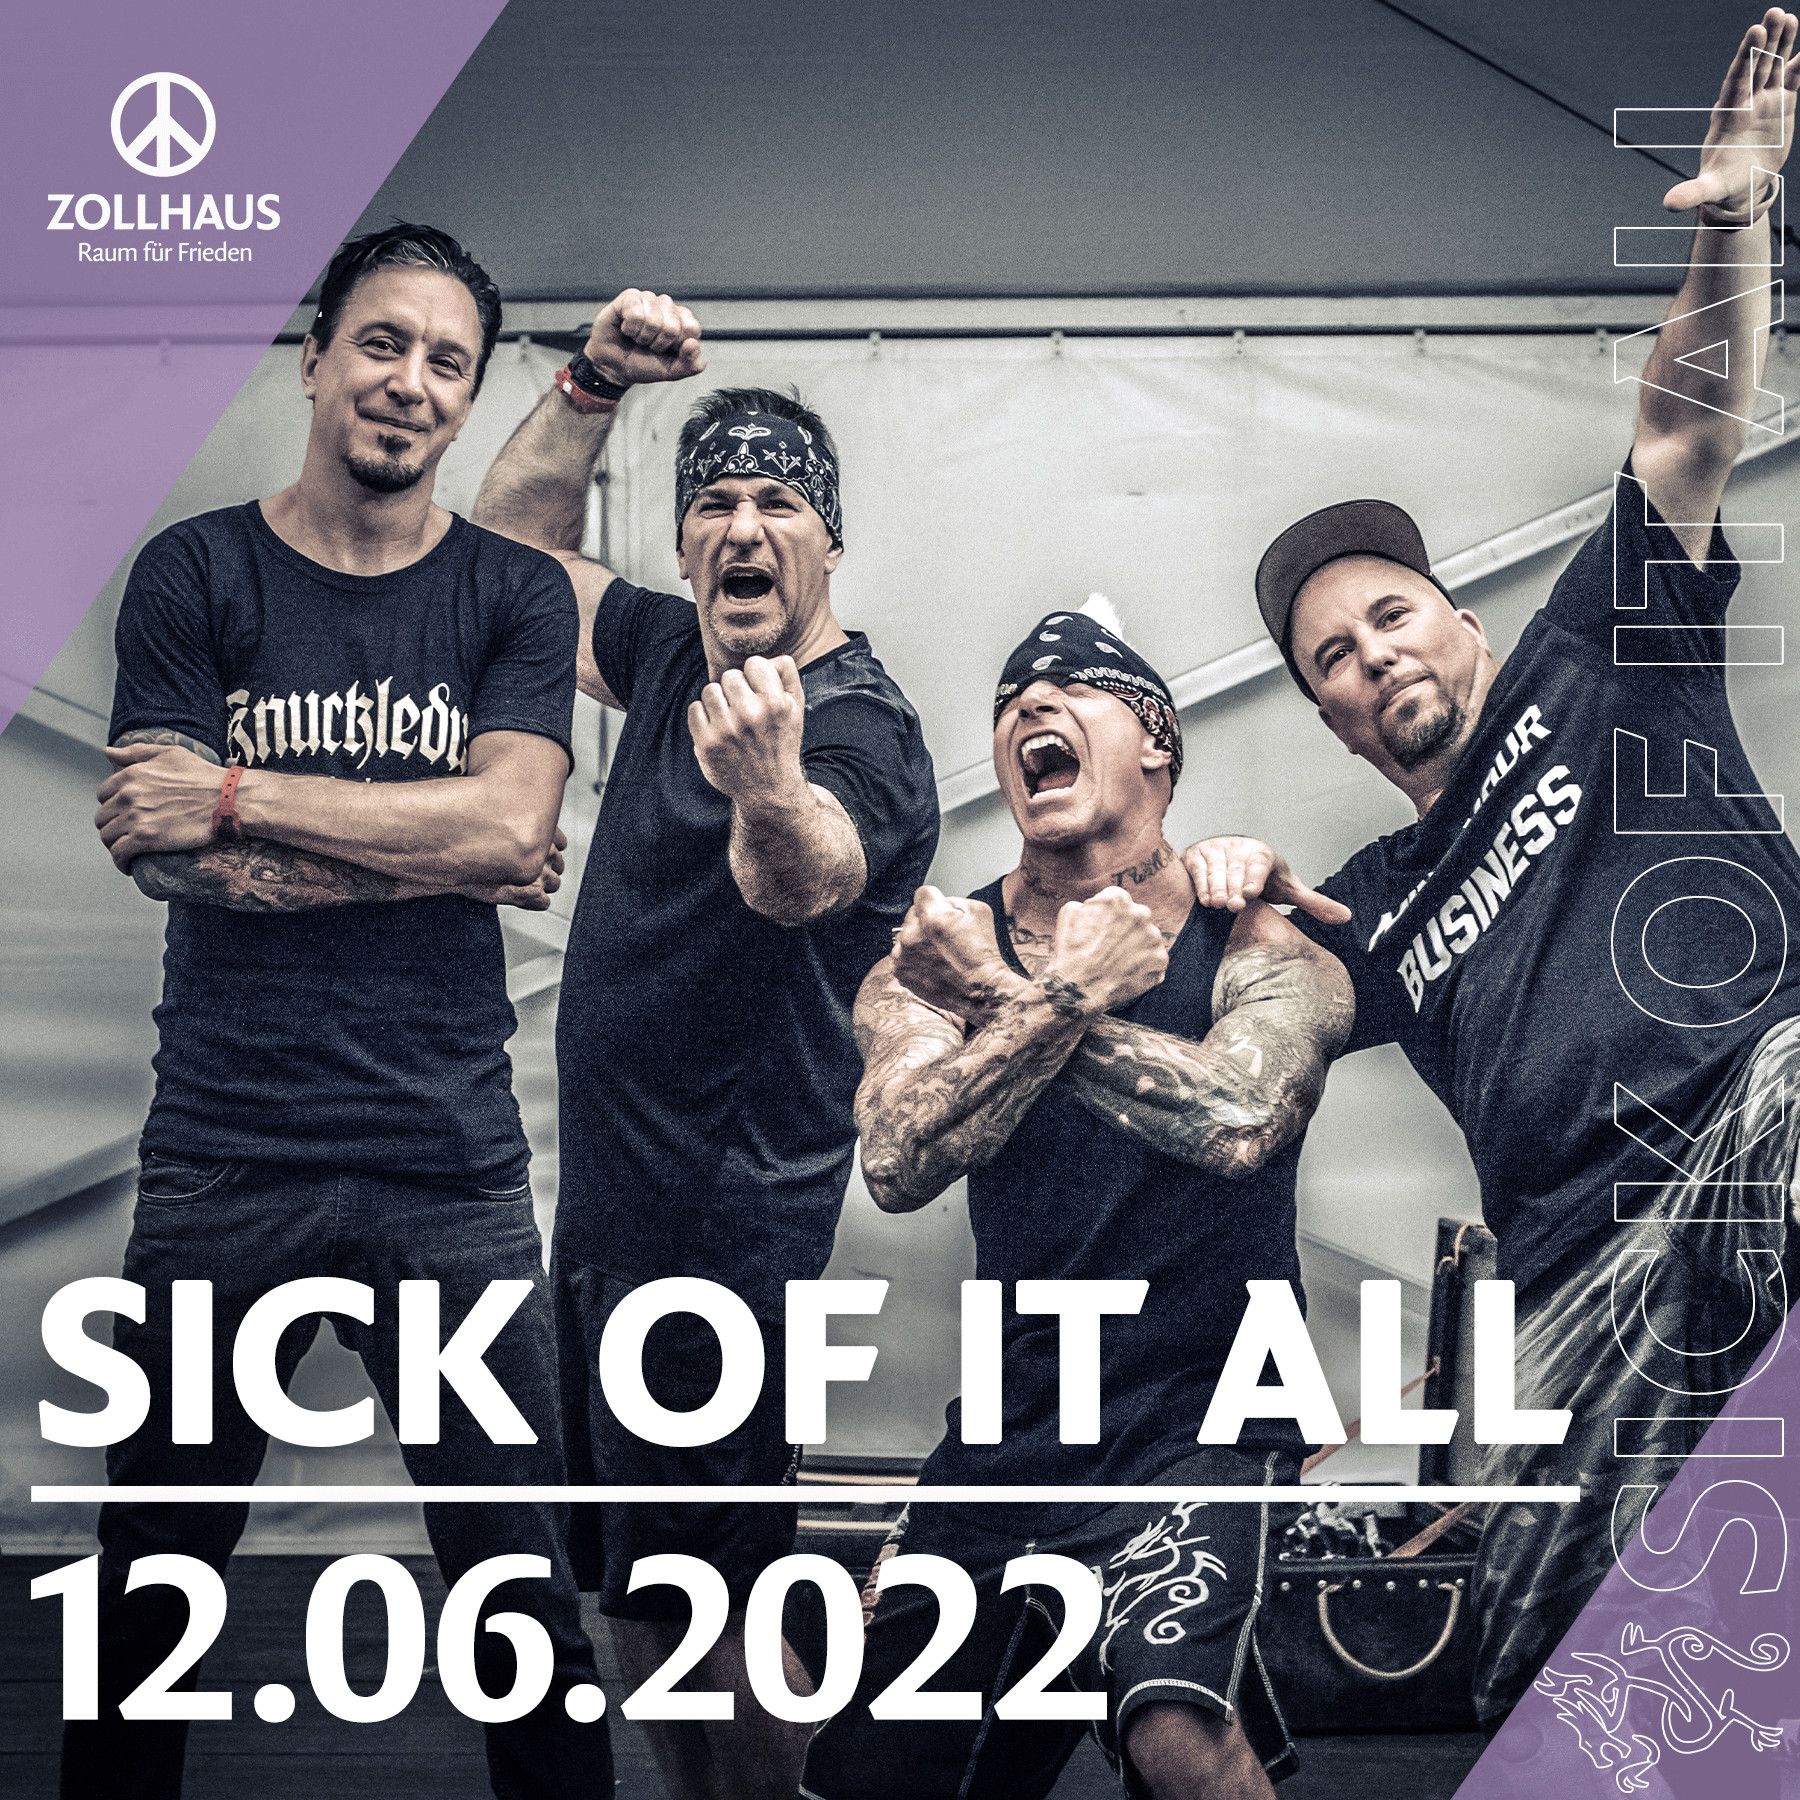 SICK OF IT ALL LIVE AM 12.06.2022